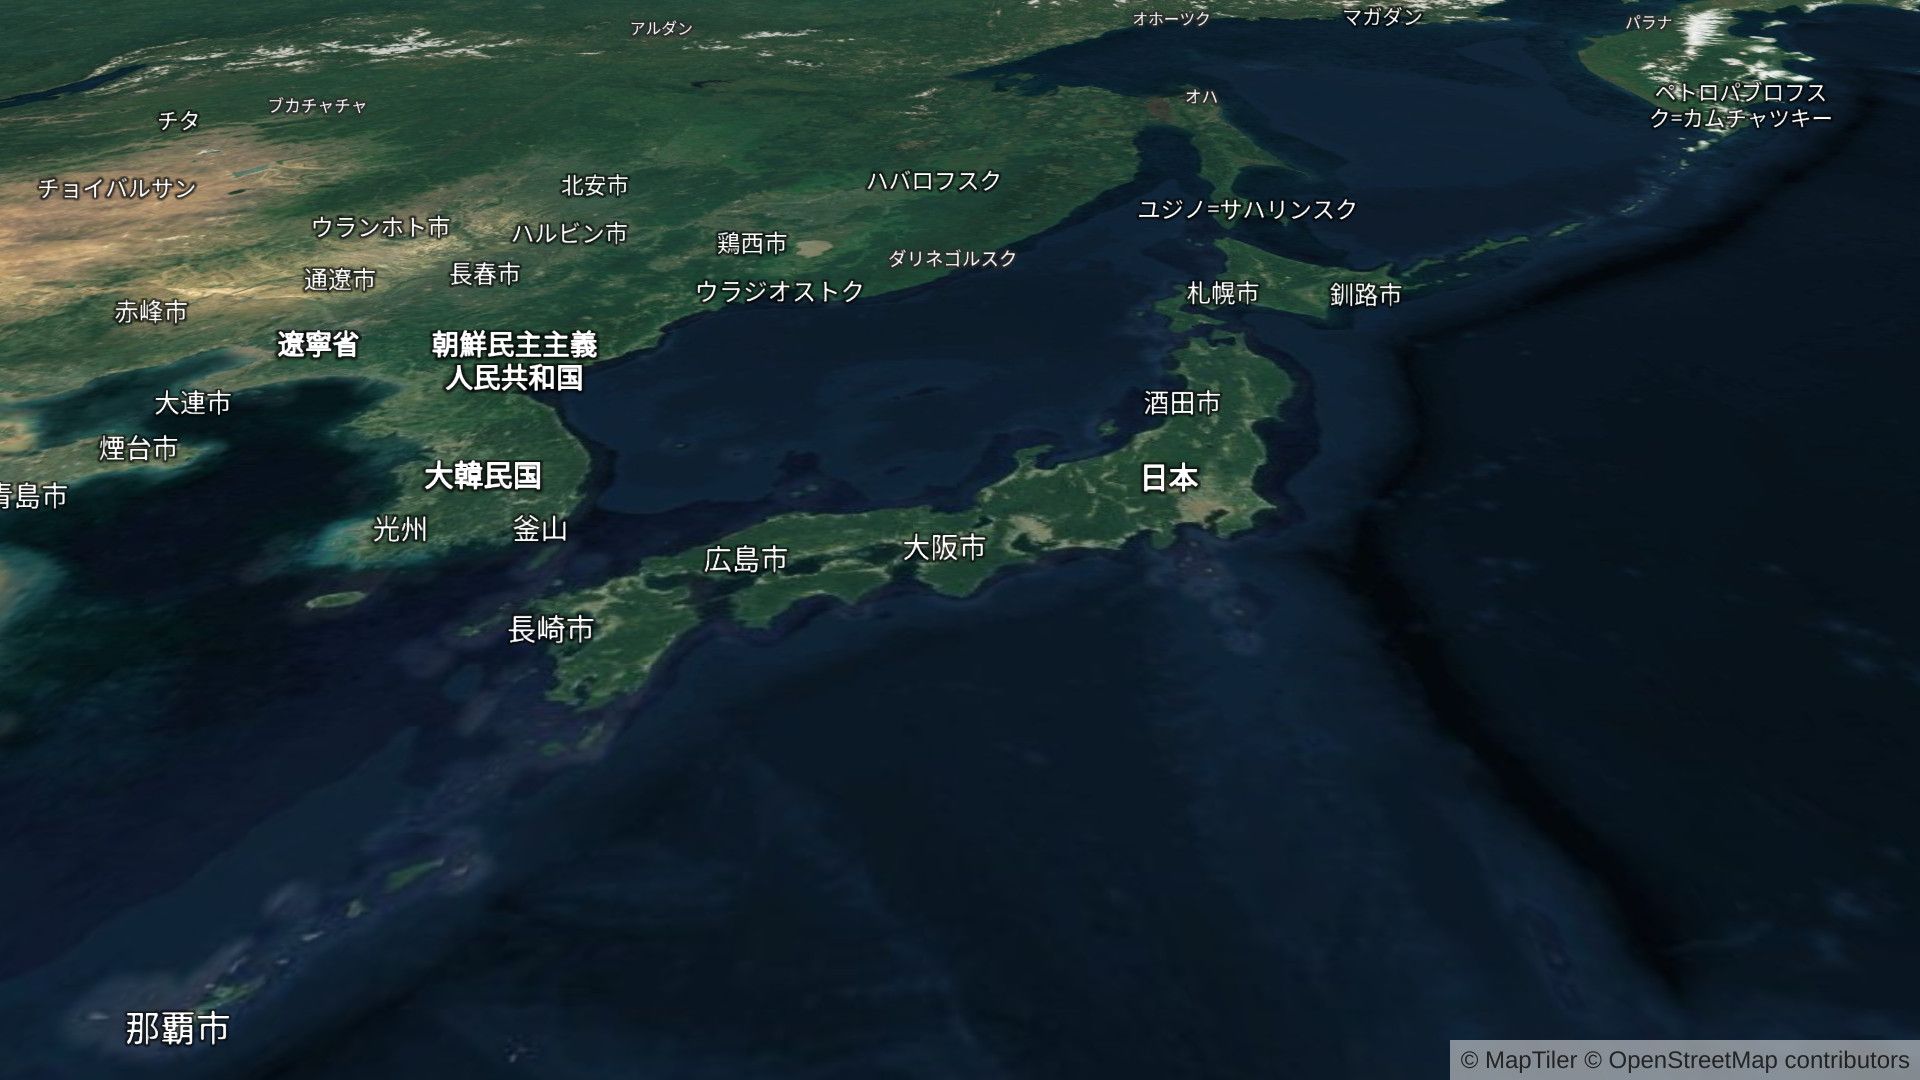 2020-05-08-high-resolution-aerial-imagery-of-entire-japan-2.jpg